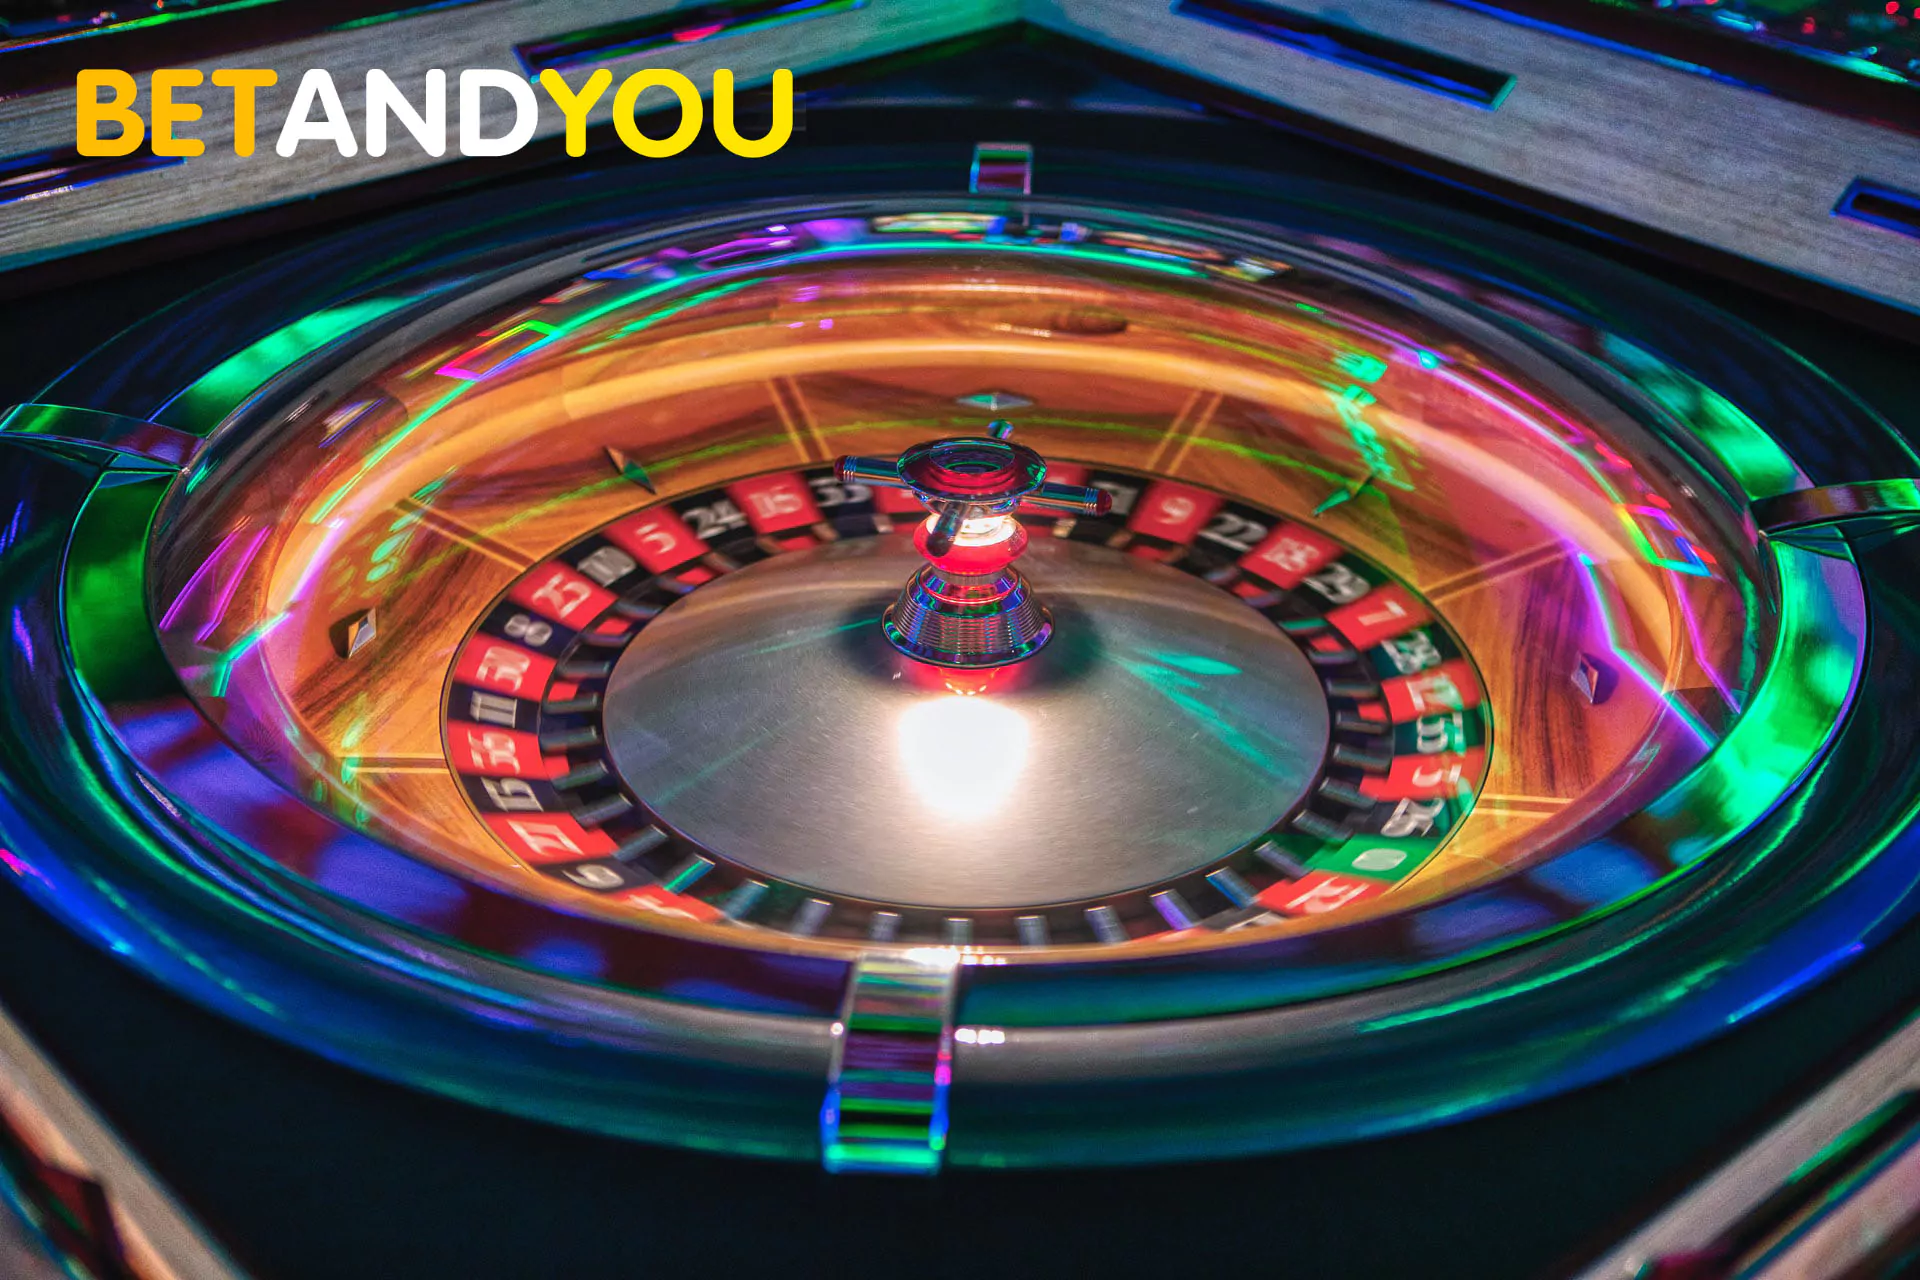 You can also play online casino games at BetAndYou.